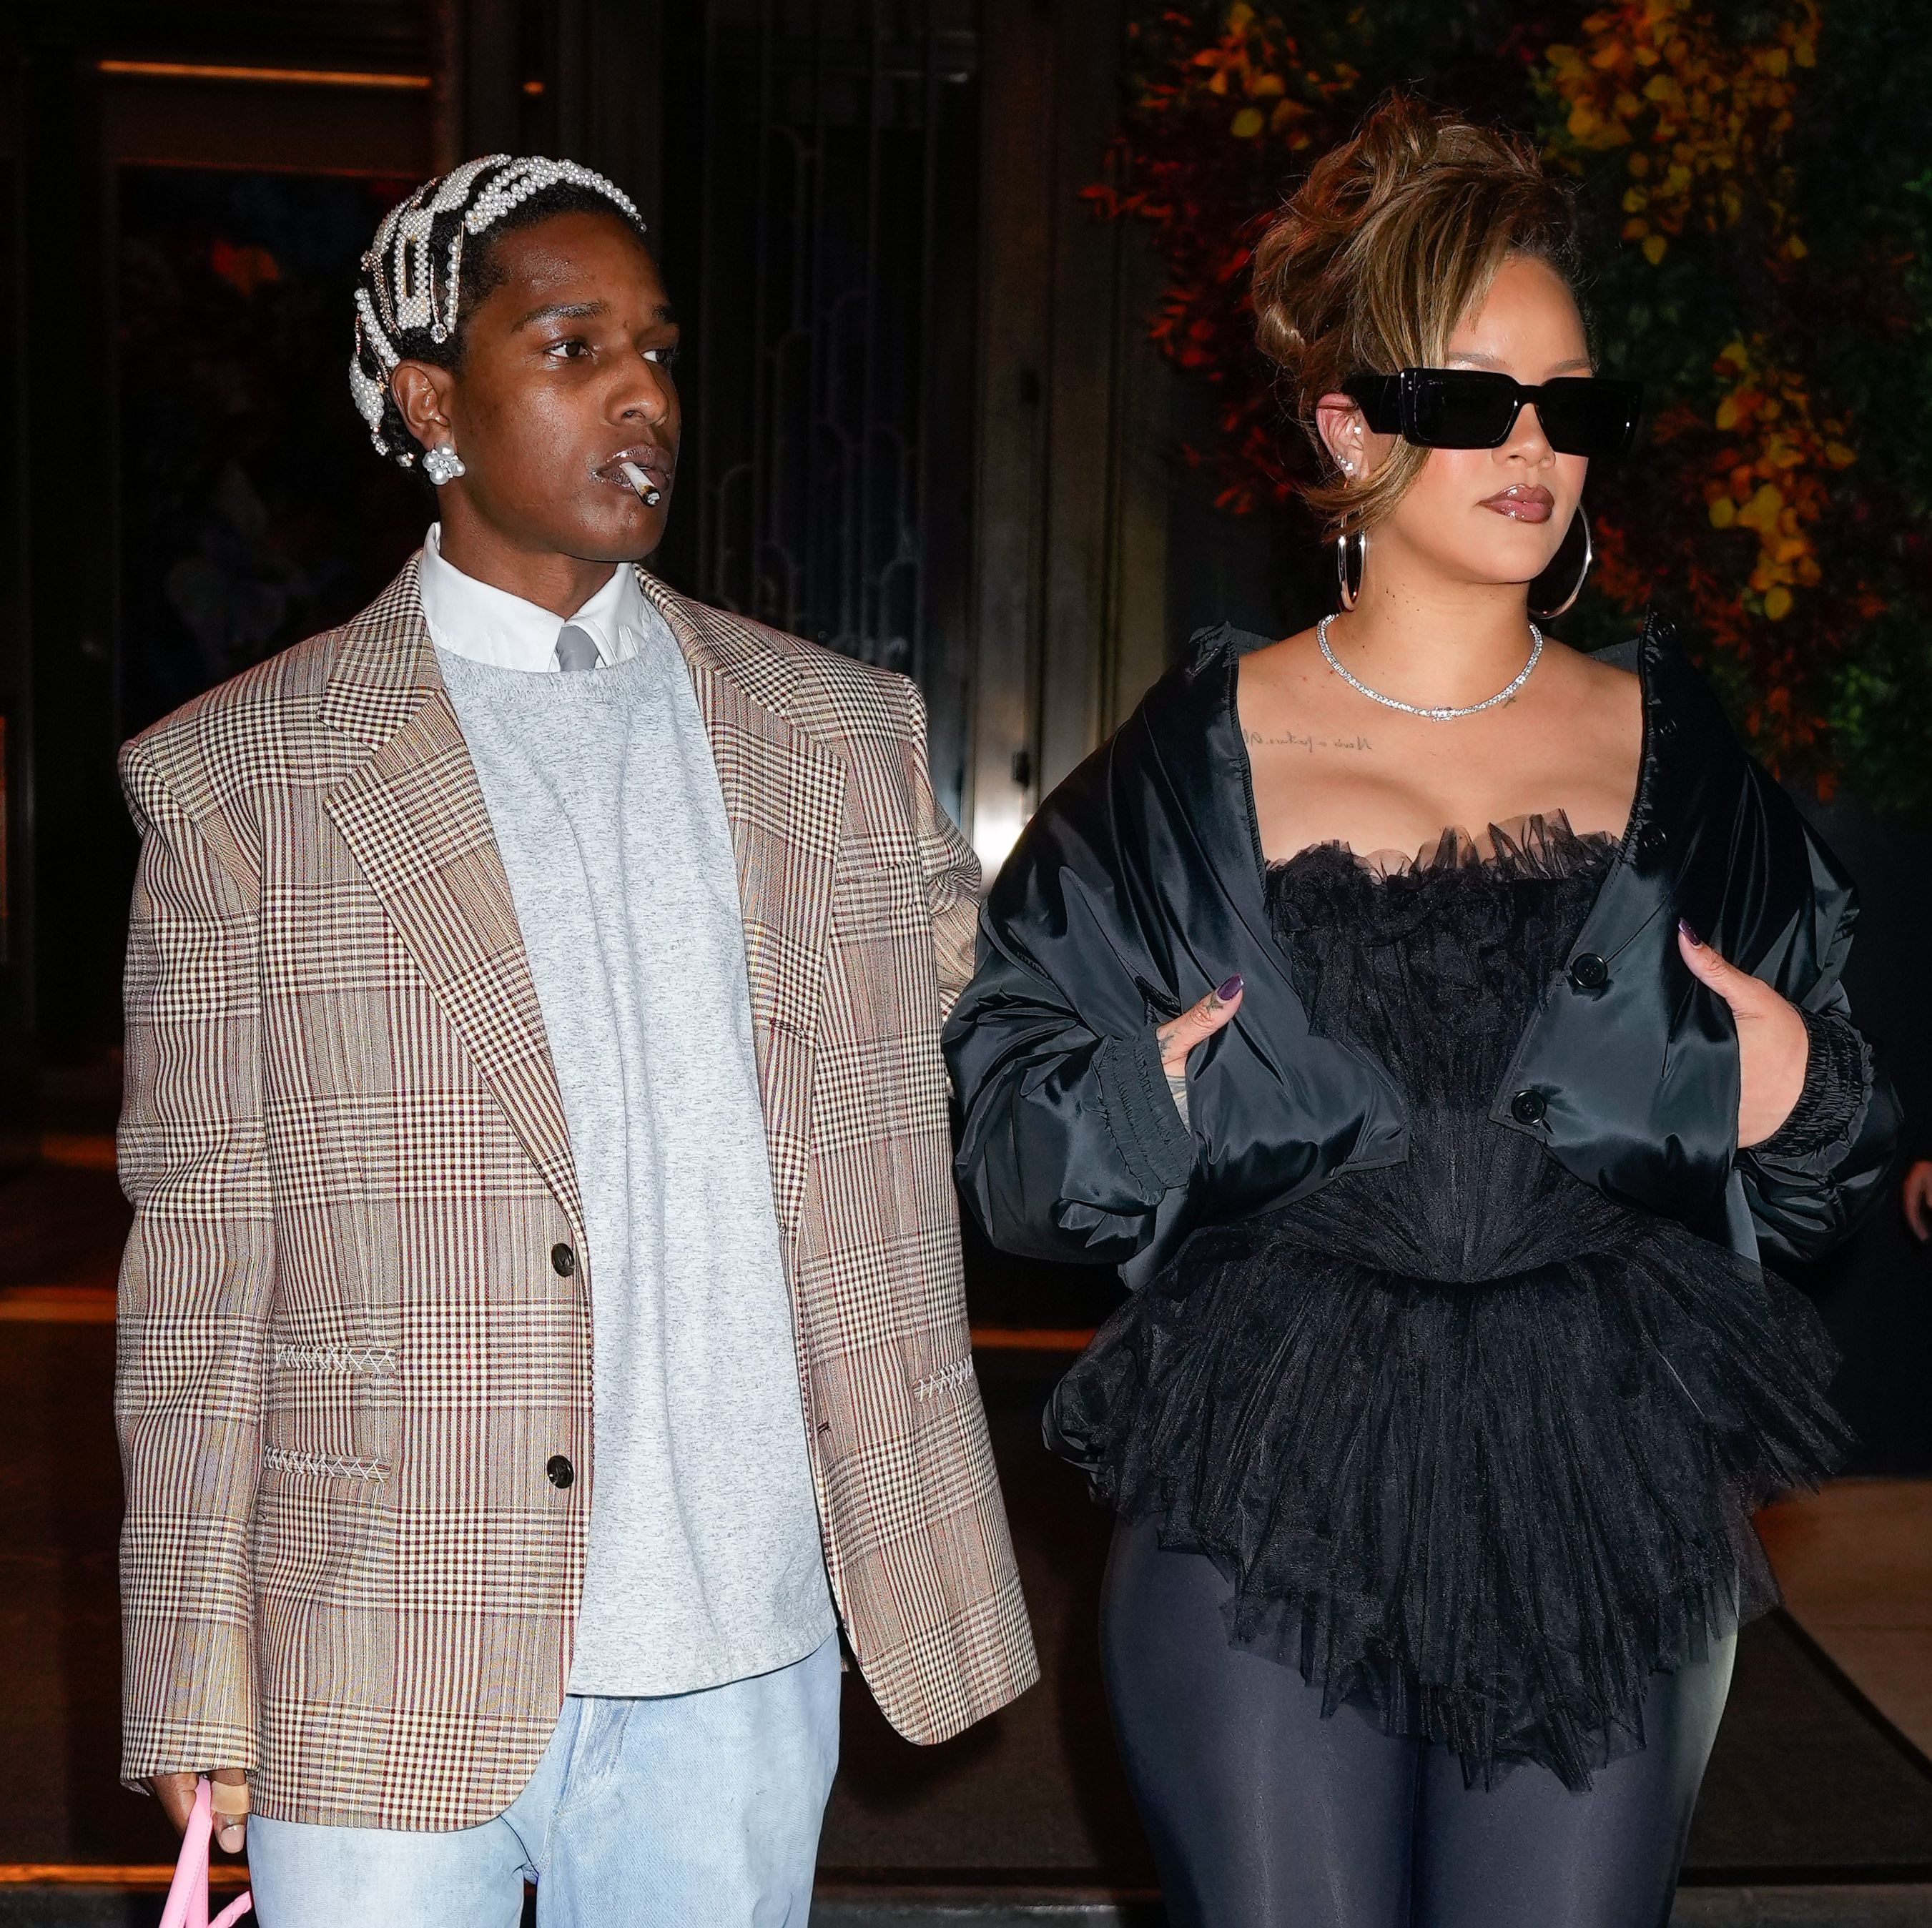 She celebrated A$AP Rocky's 35th birthday at Carbone.